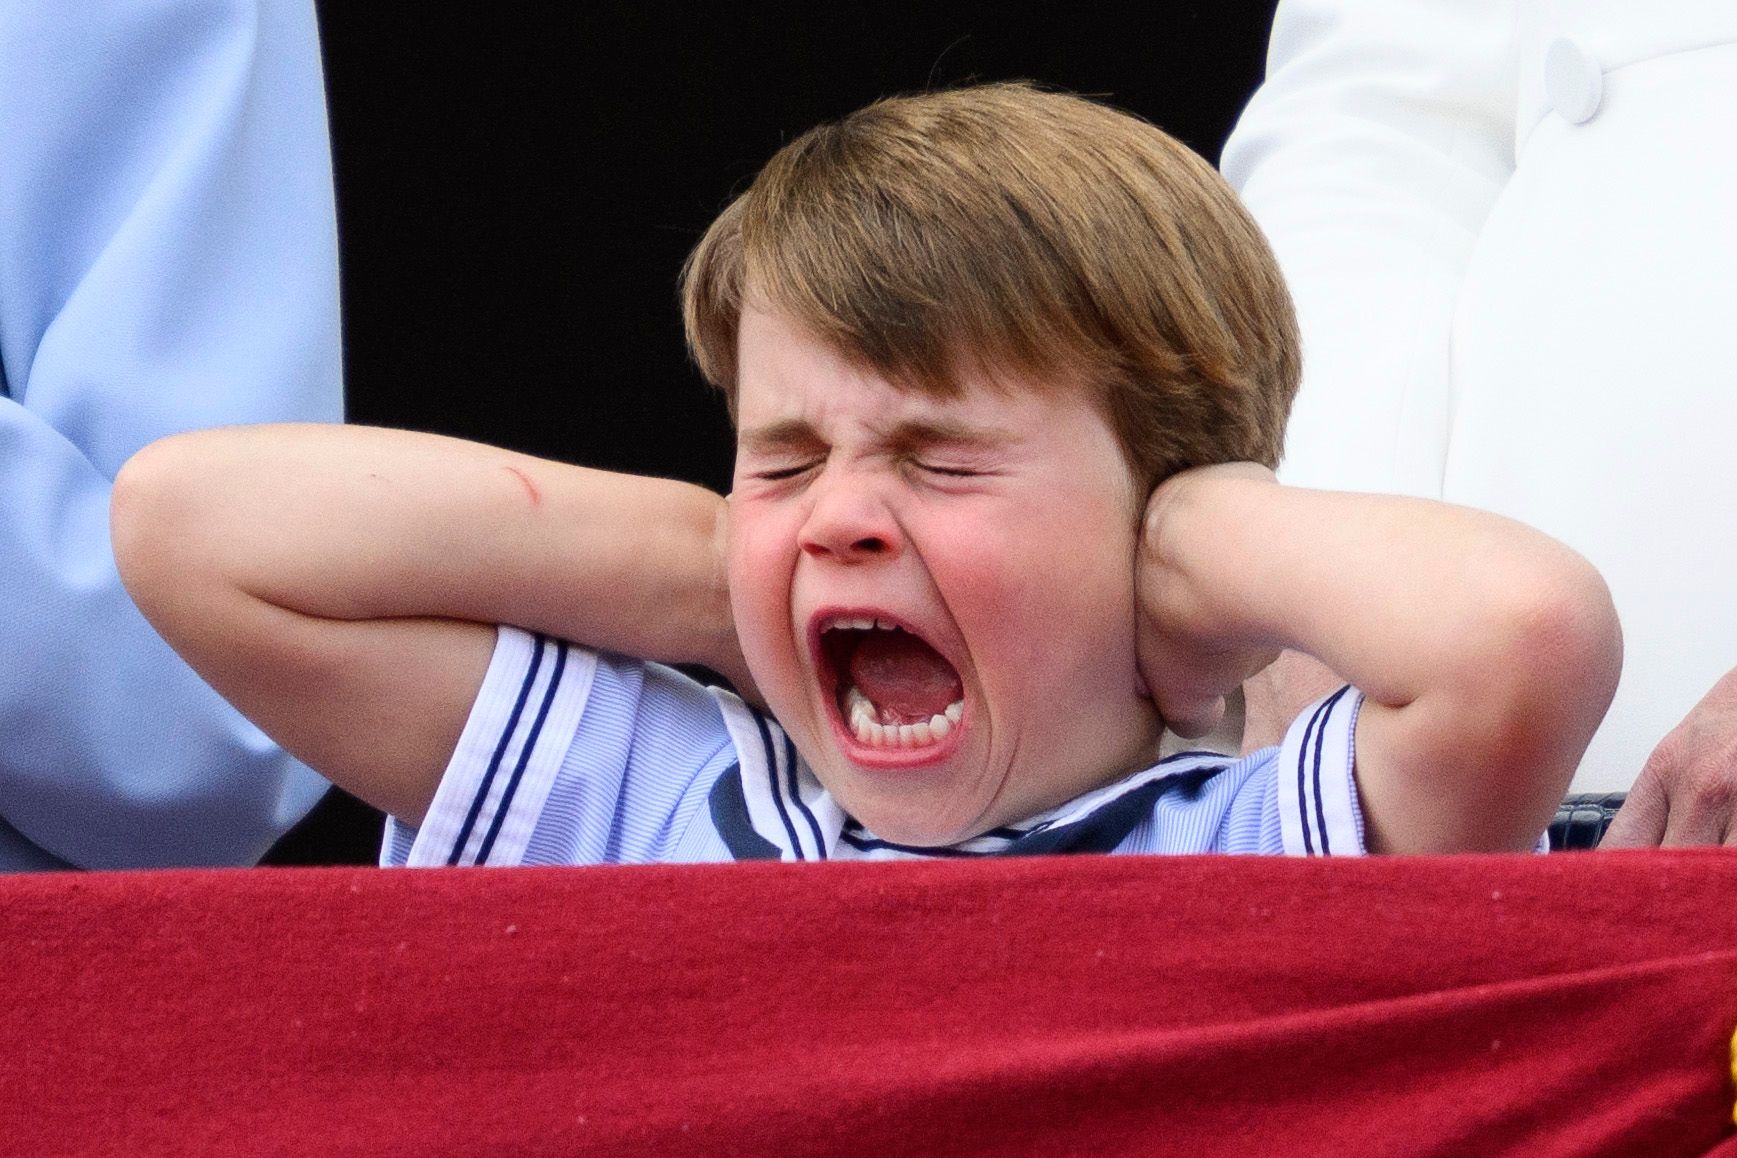 <p>Too loud! Prince Louis of Cambridge covered his ears on the Buckingham Palace balcony during the <a href="https://www.wonderwall.com/celebrity/royals/trooping-the-colour-2022-see-all-the-best-photos-of-the-cambridge-kids-duchess-kate-and-more-royals-amid-the-queens-platinum-jubilee-605764.gallery">Trooping the Colour</a> Royal Air Force fly-past on June 2, 2022.</p>